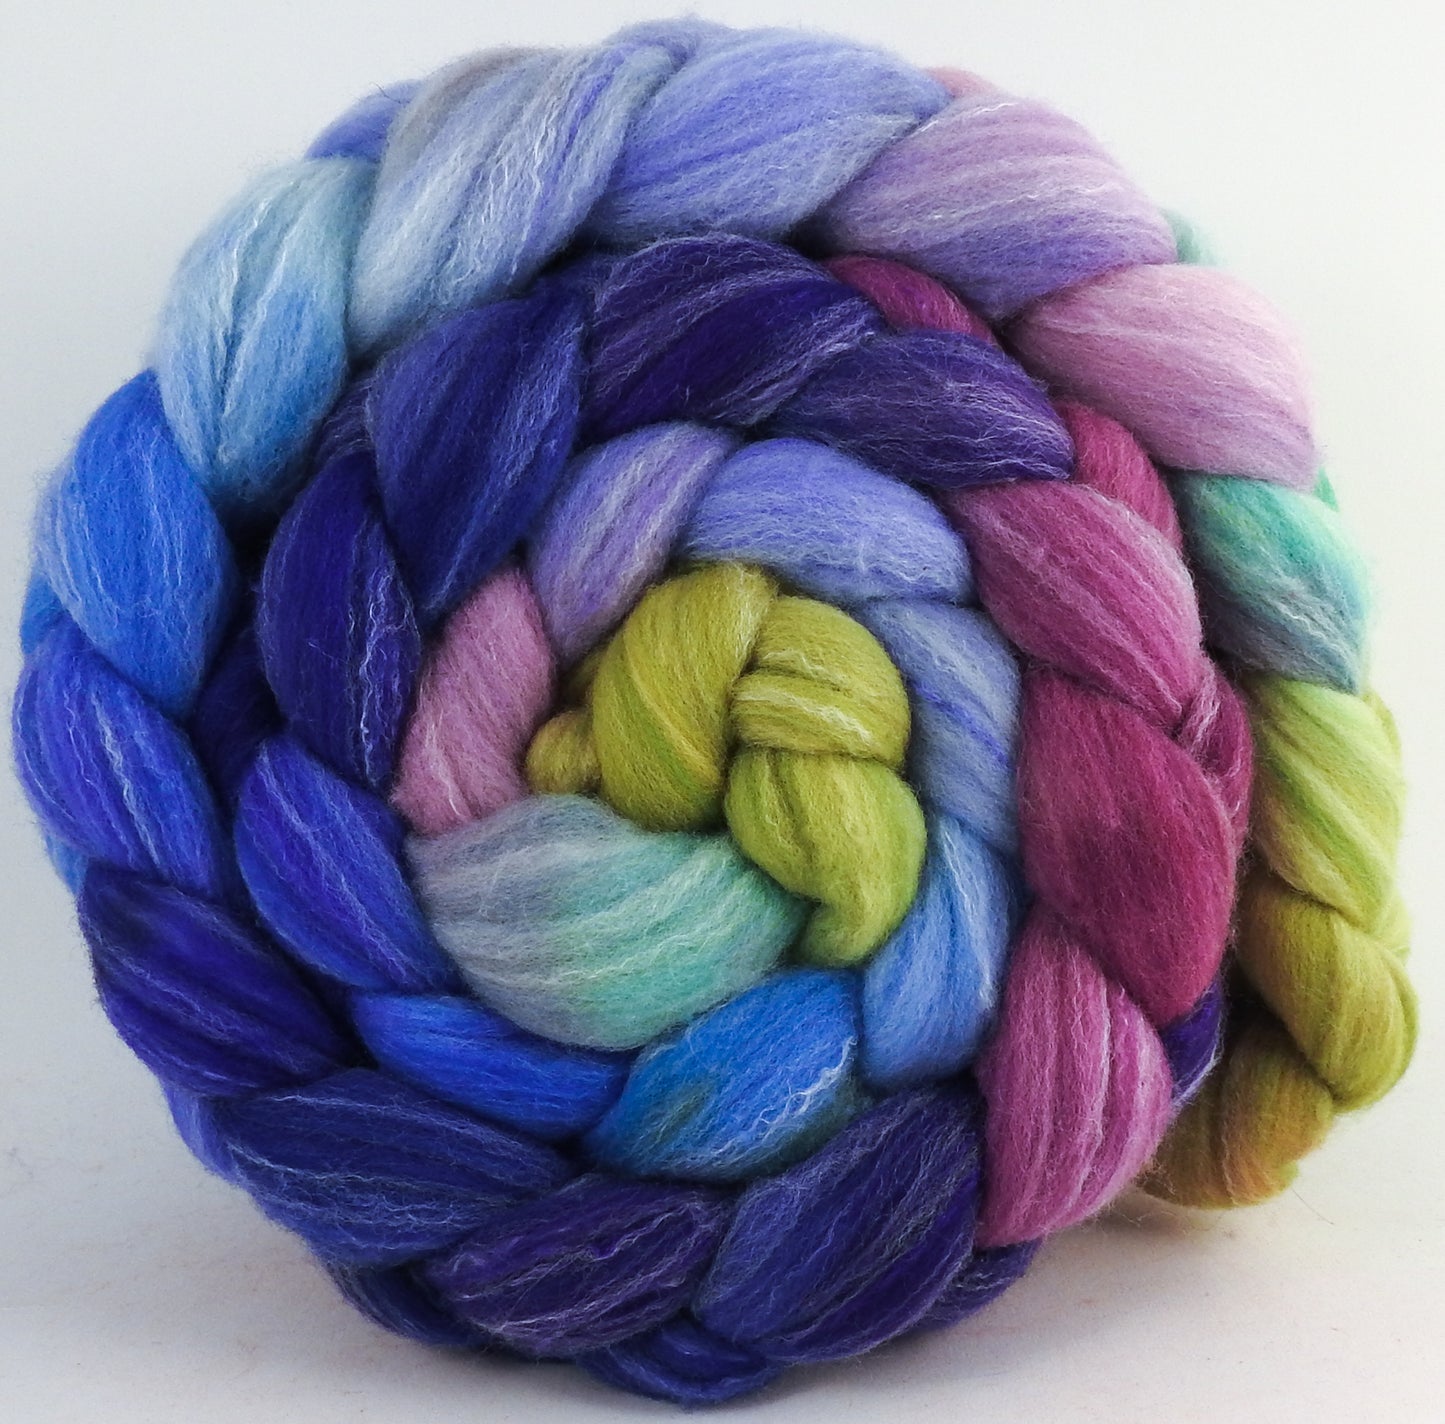 Hand dyed top for spinning - Larkspur - (5.6 oz.) Targhee/silk/ bamboo (80/10/10)